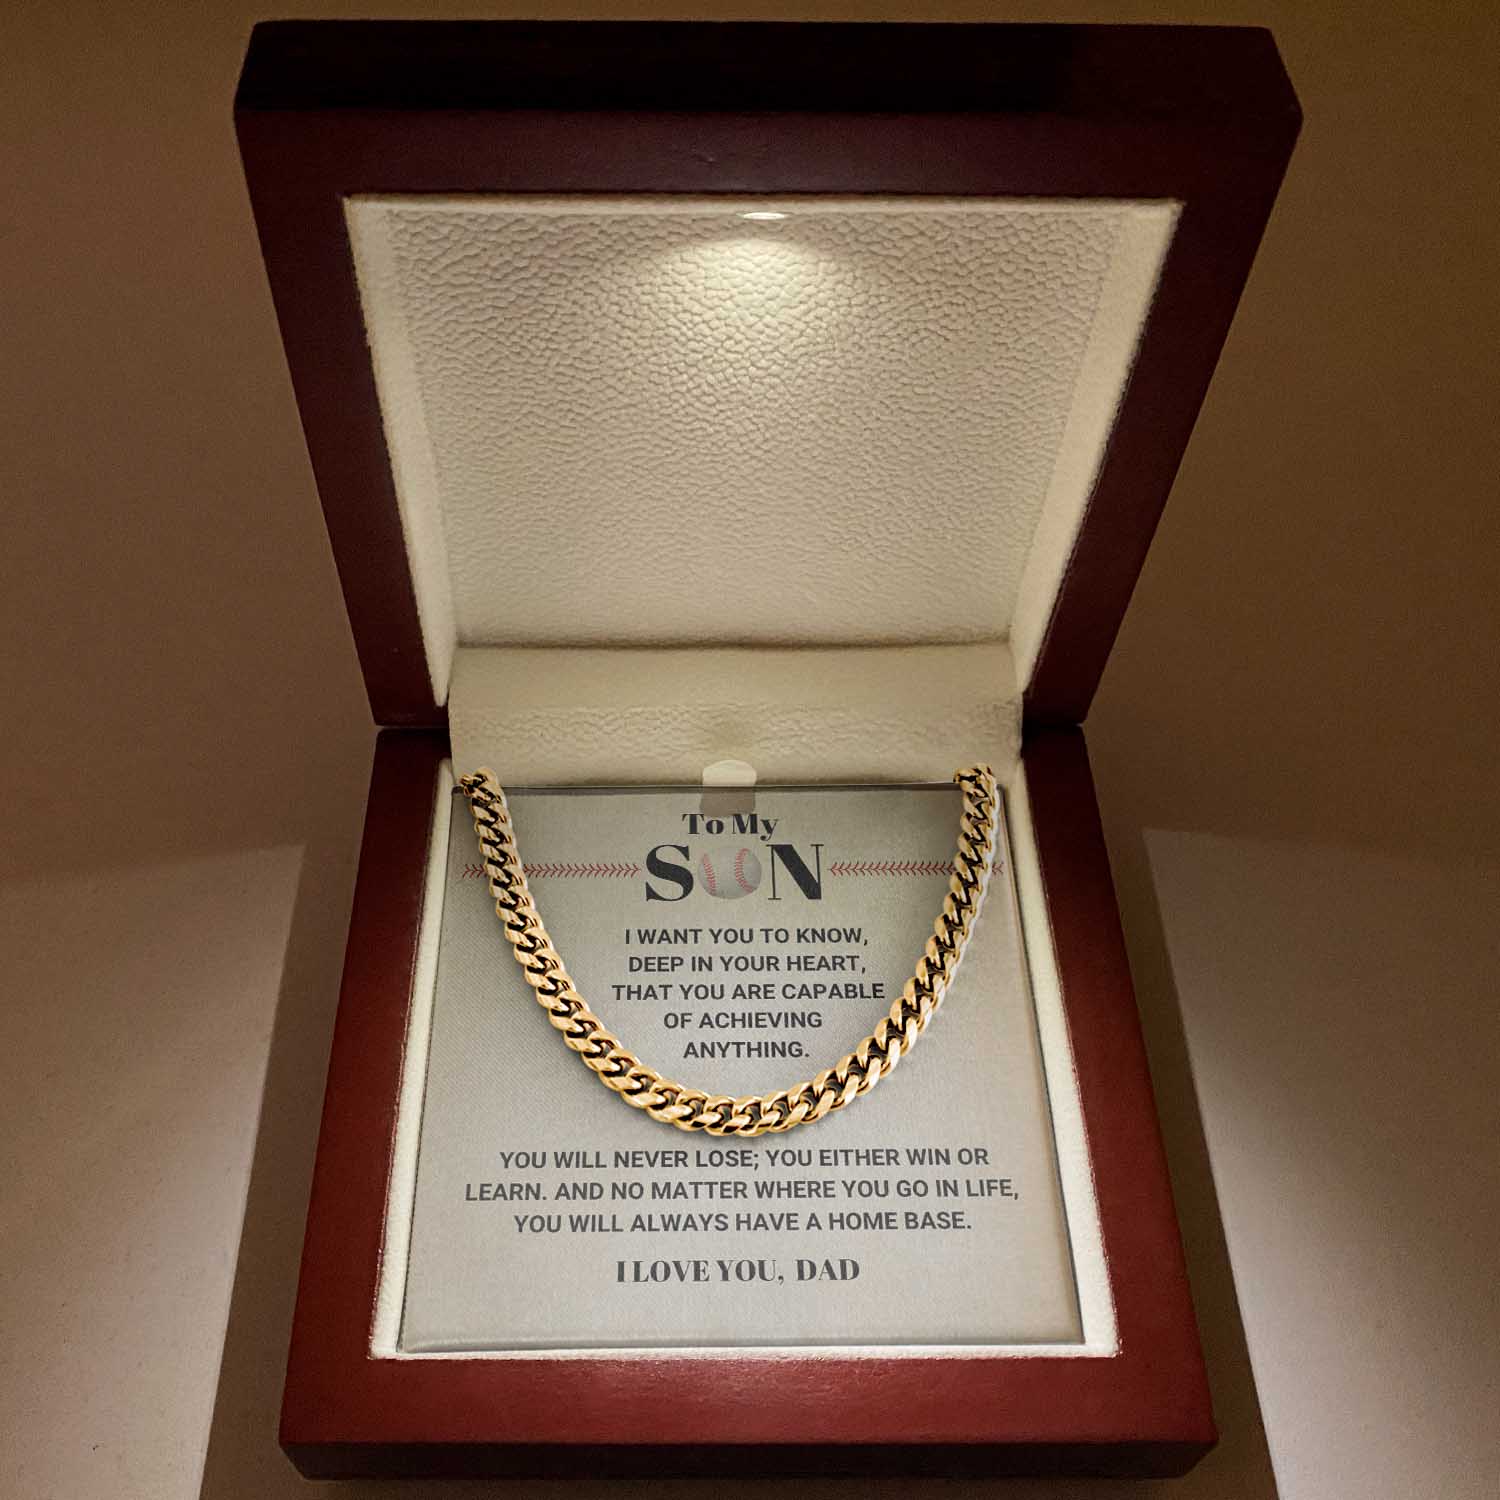 ShineOn Fulfillment Cuban Link Chain 14K Yellow Gold Finish / Luxury Box To my Son from Dad - Home Base - 5mm Cuban Link Chain